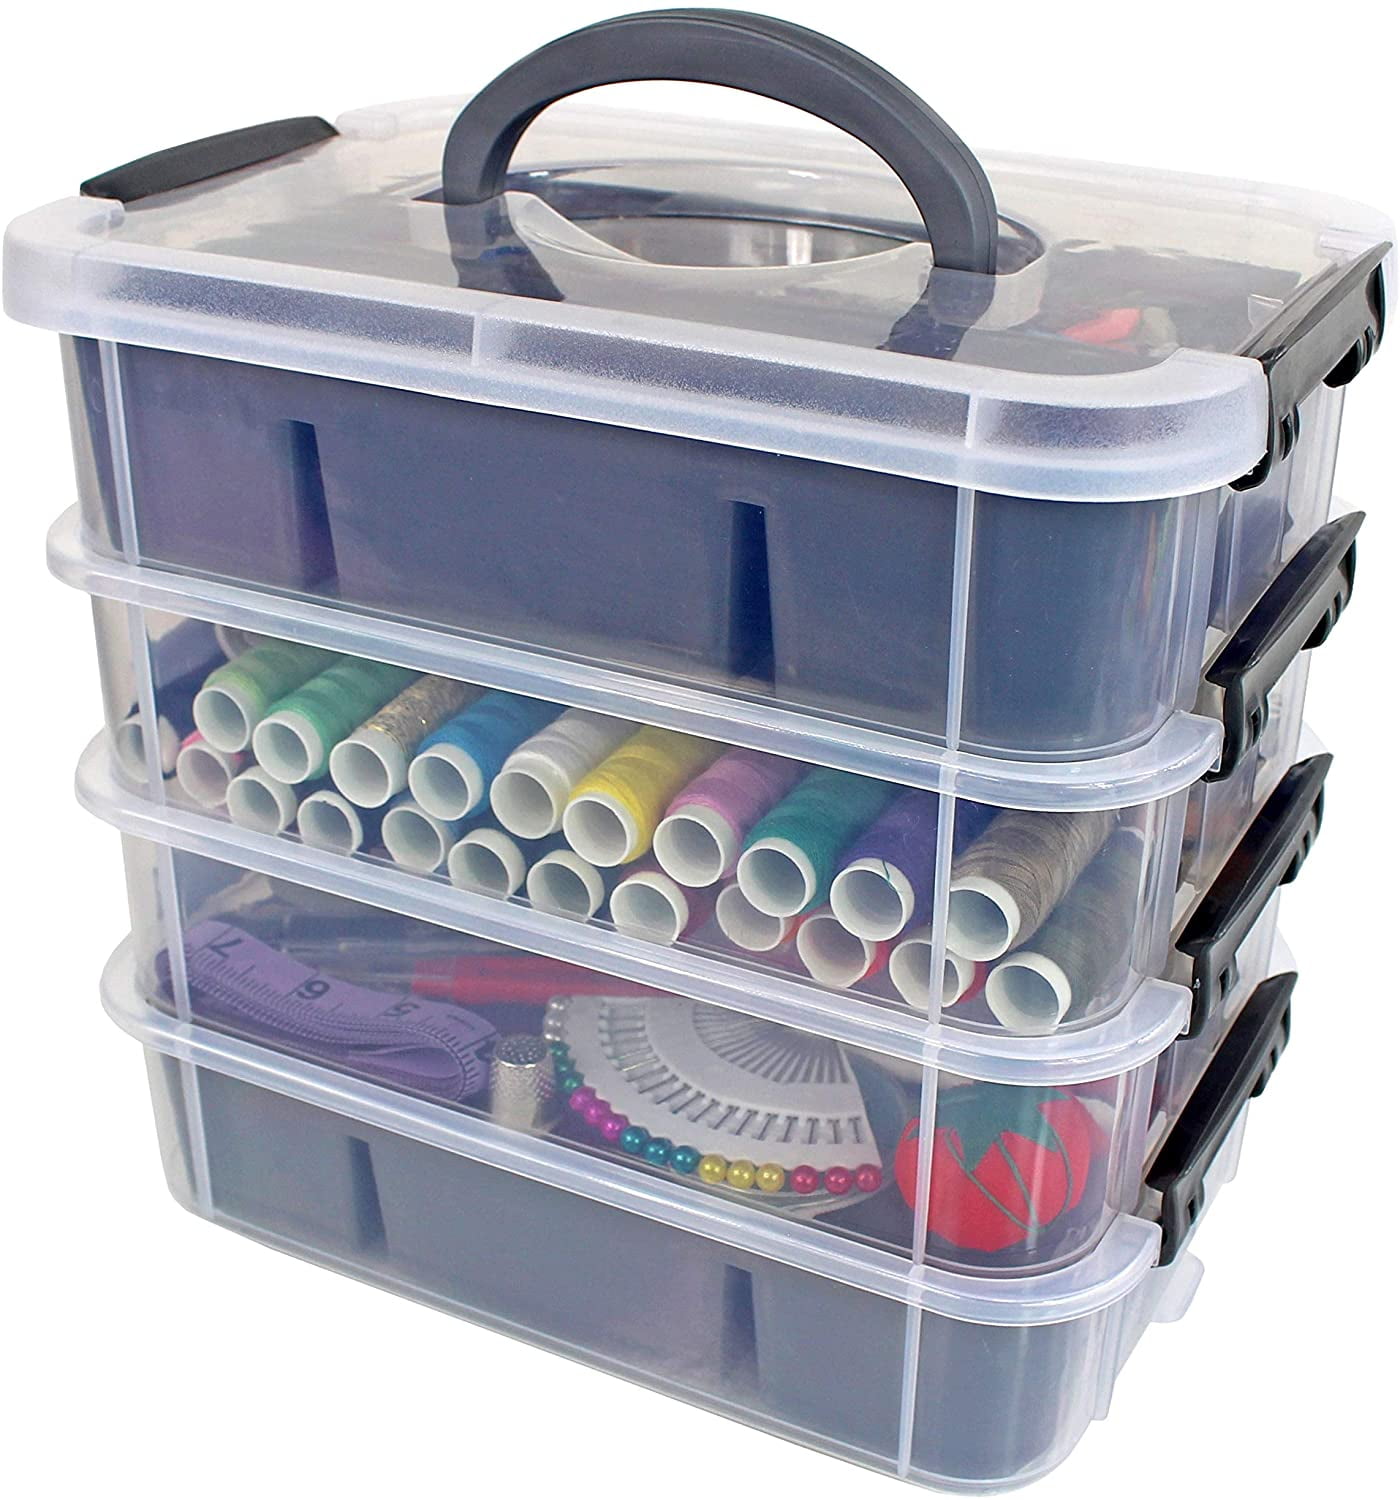 2 PCS Plastic Tray, Grids Bead Organizer With Movable Dividers Storage-  Adjustable Clear Compartment Plastic Organizer-Travel Organizer Box, Small  Parts Organizer For Beads, Jewlery, Rings 